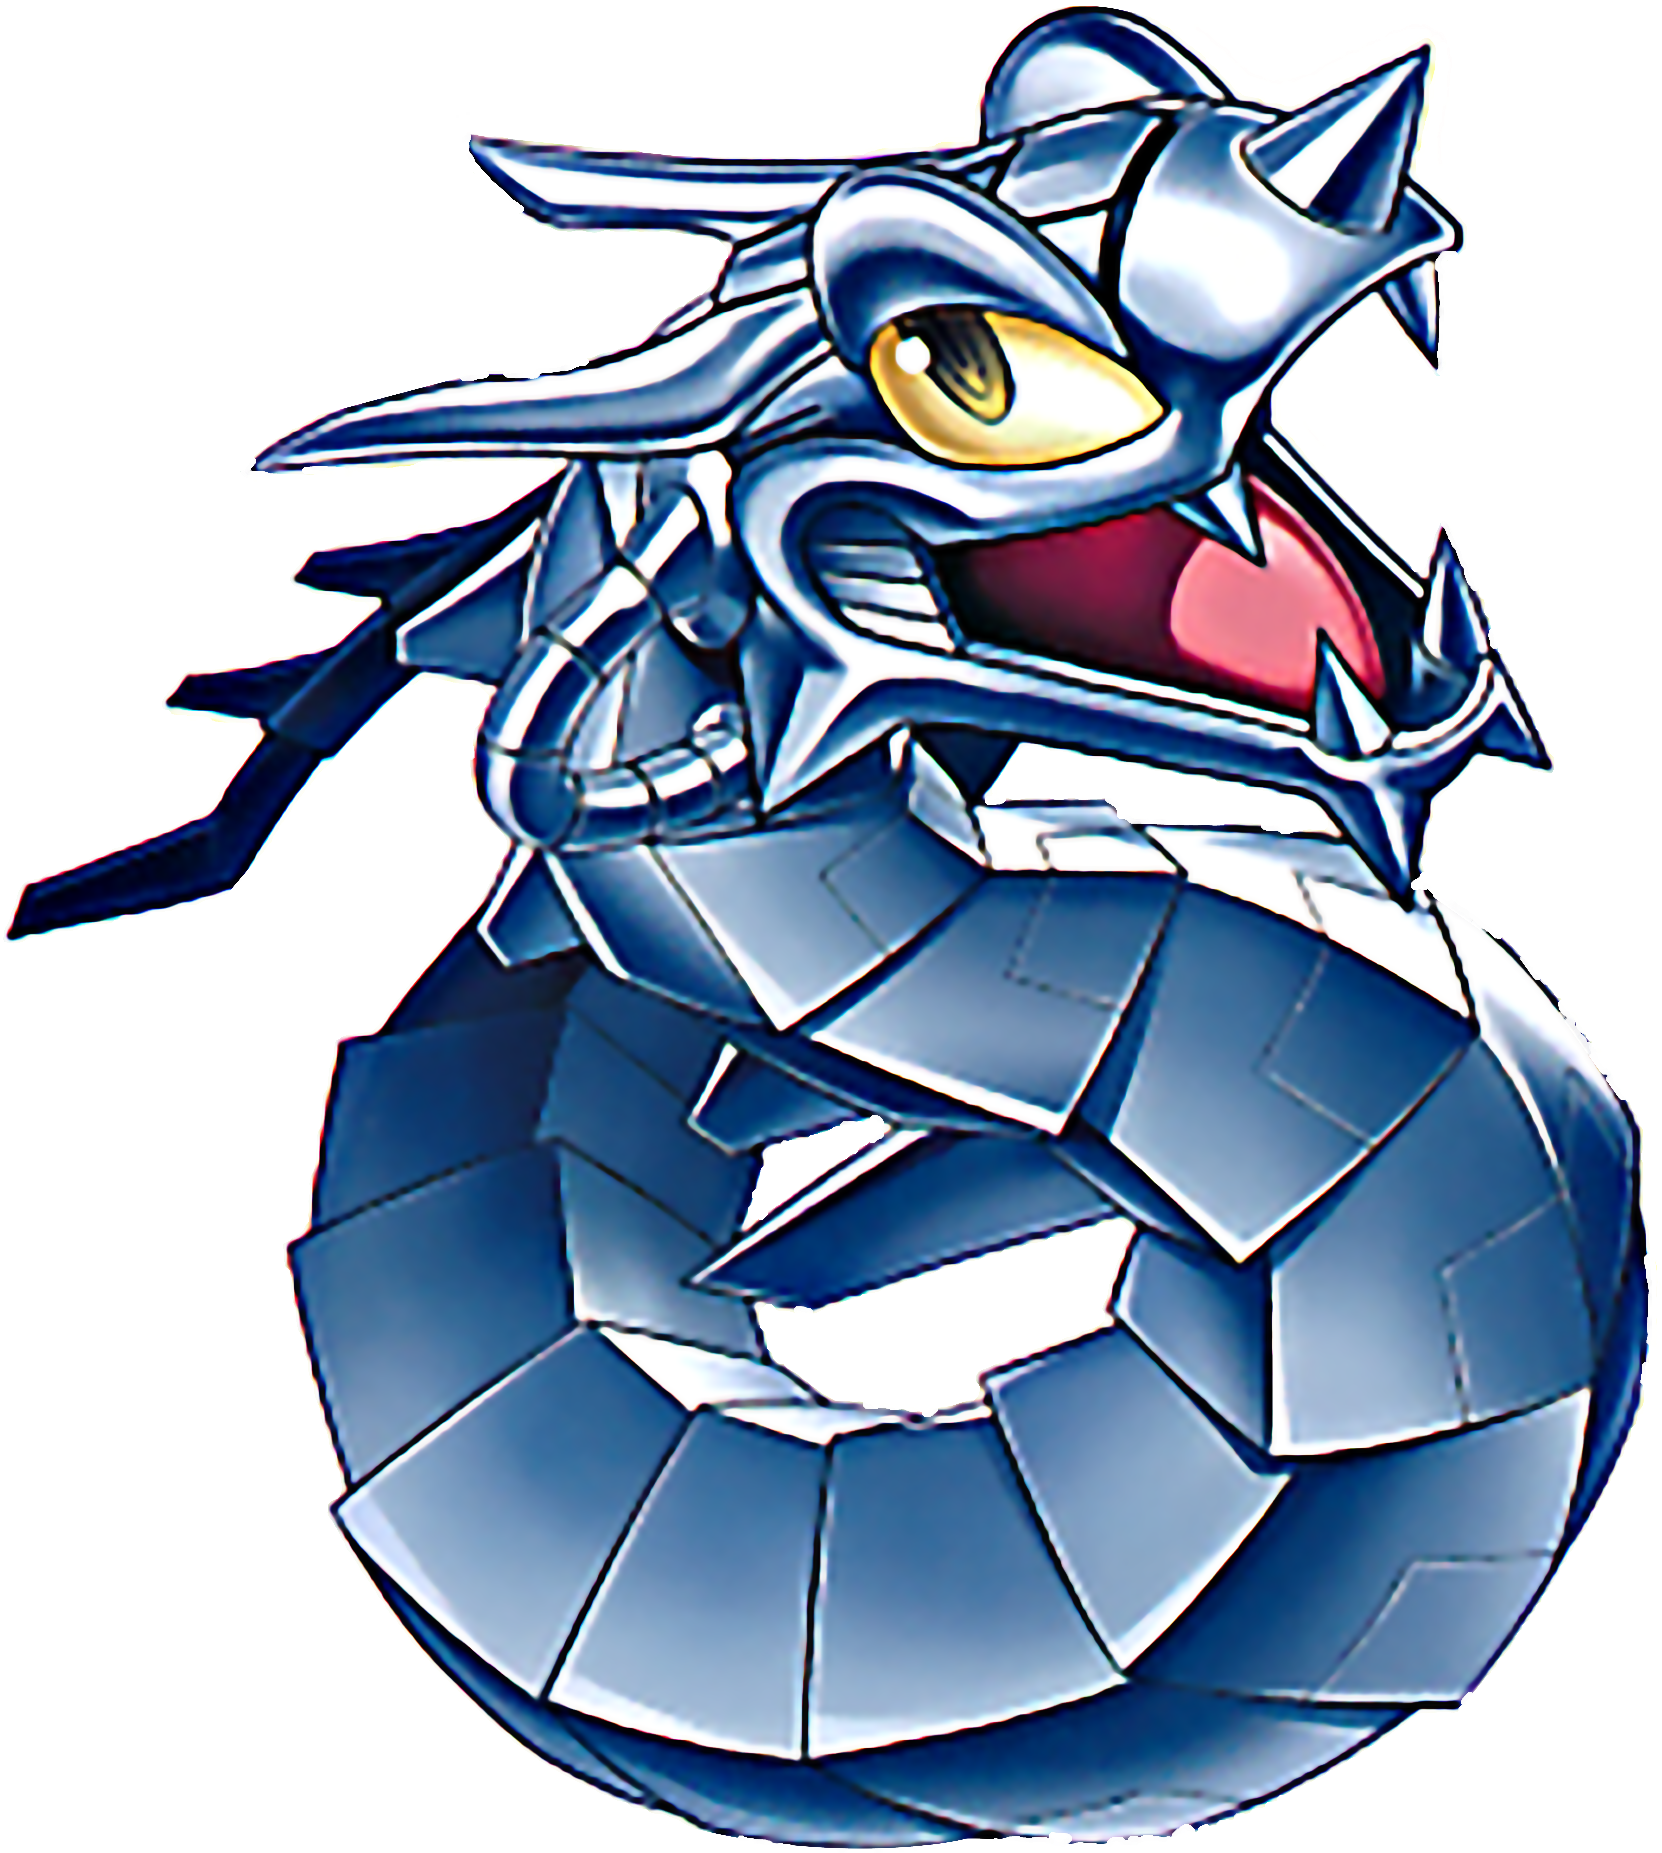 Image Result For Toon Cyber Dragon - Yugioh Toon Cyber Dragon (2000x2019)